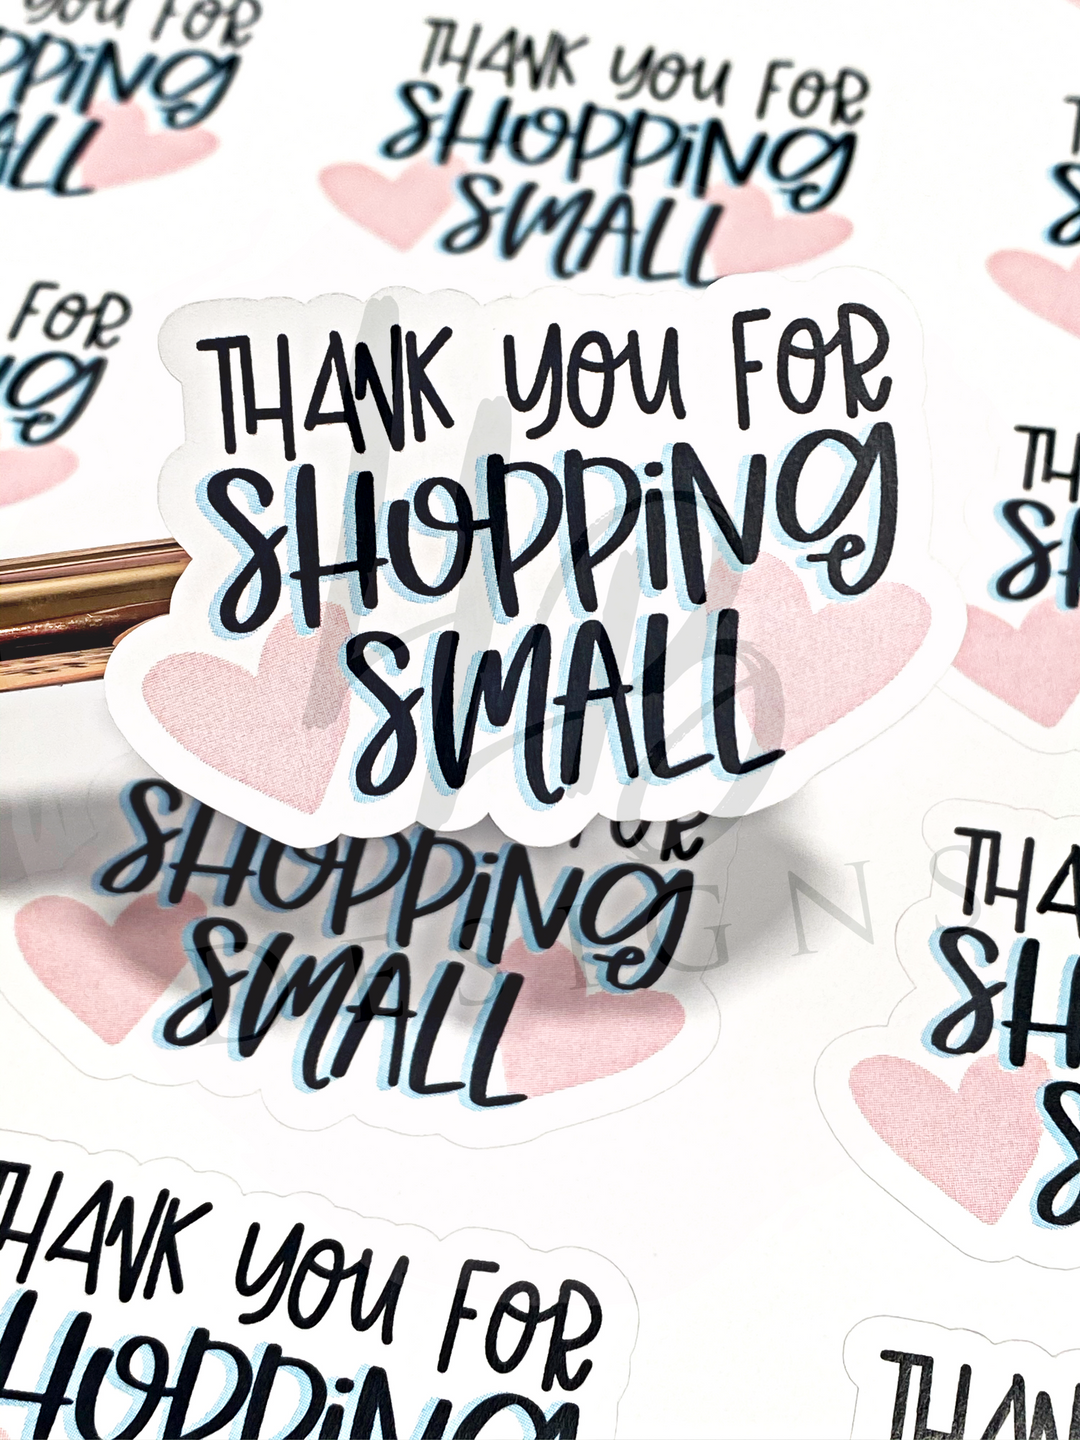 Thank You For Shopping Small Hears |  Packaging Stickers | Business Branding | Small Shop Stickers | Sticker #: S0037 | Ready To Ship